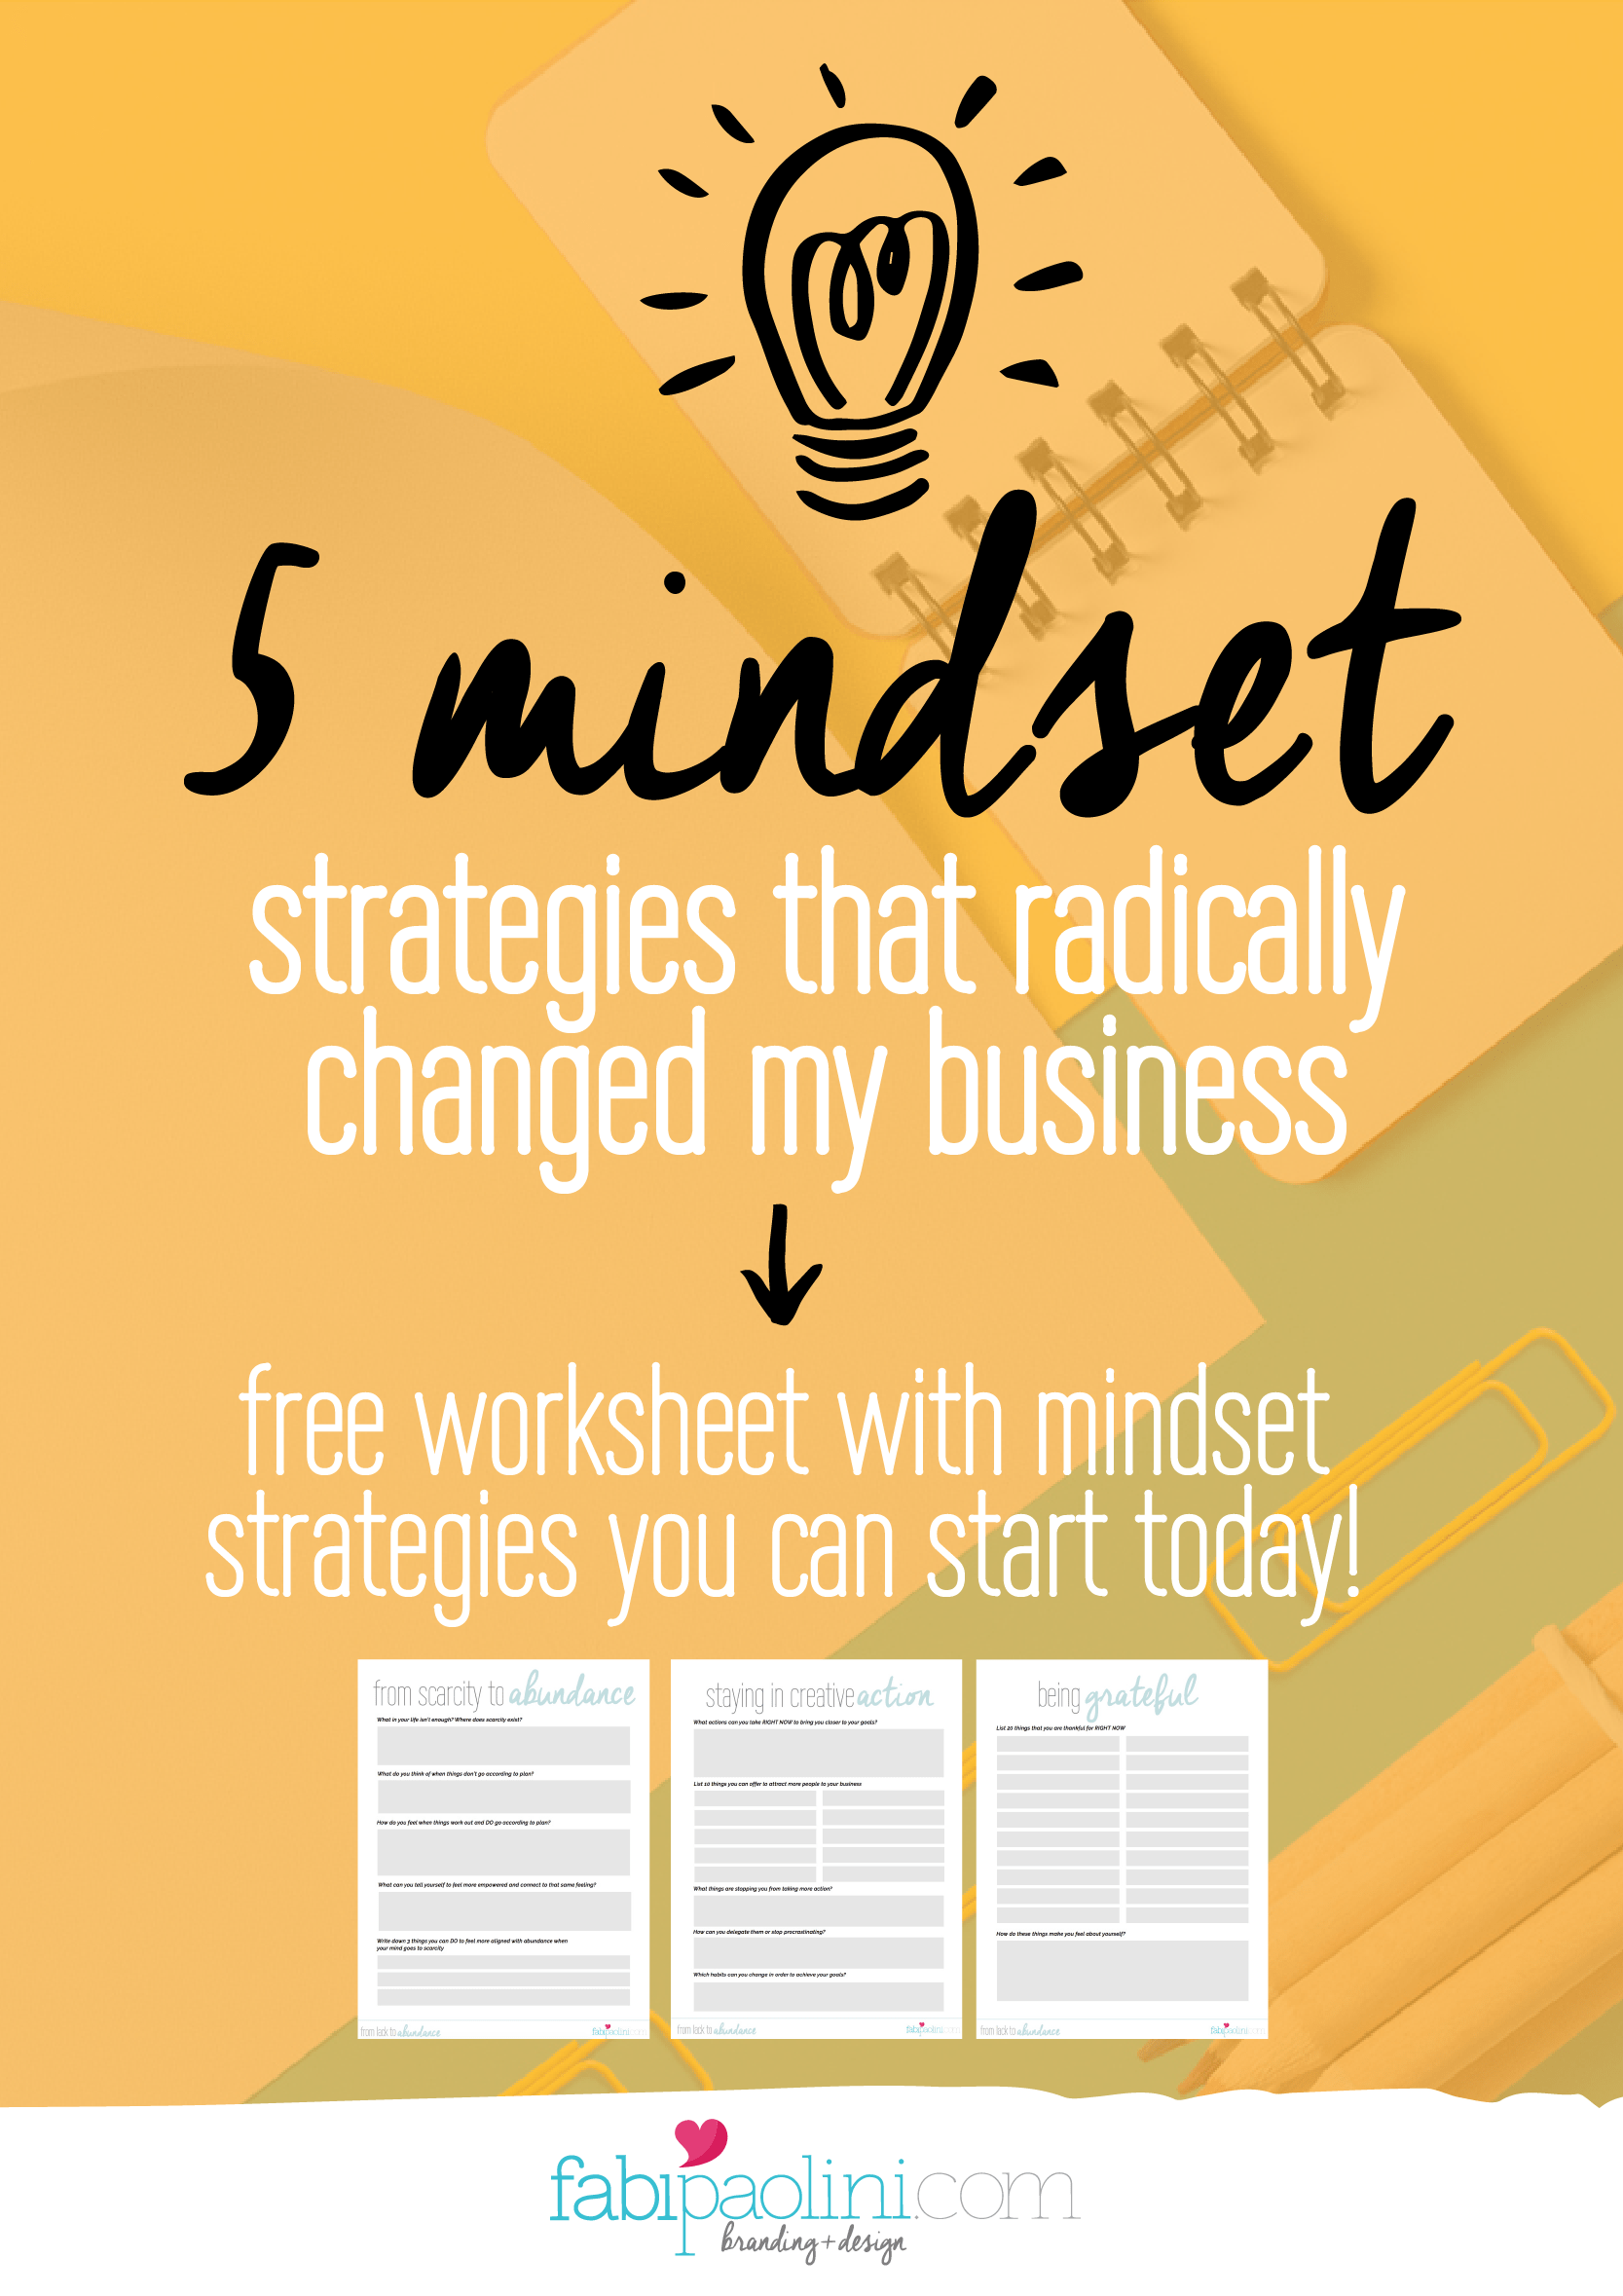 5 mindset strategies that changed my business. How to go from lack to abundance. Free guide inside